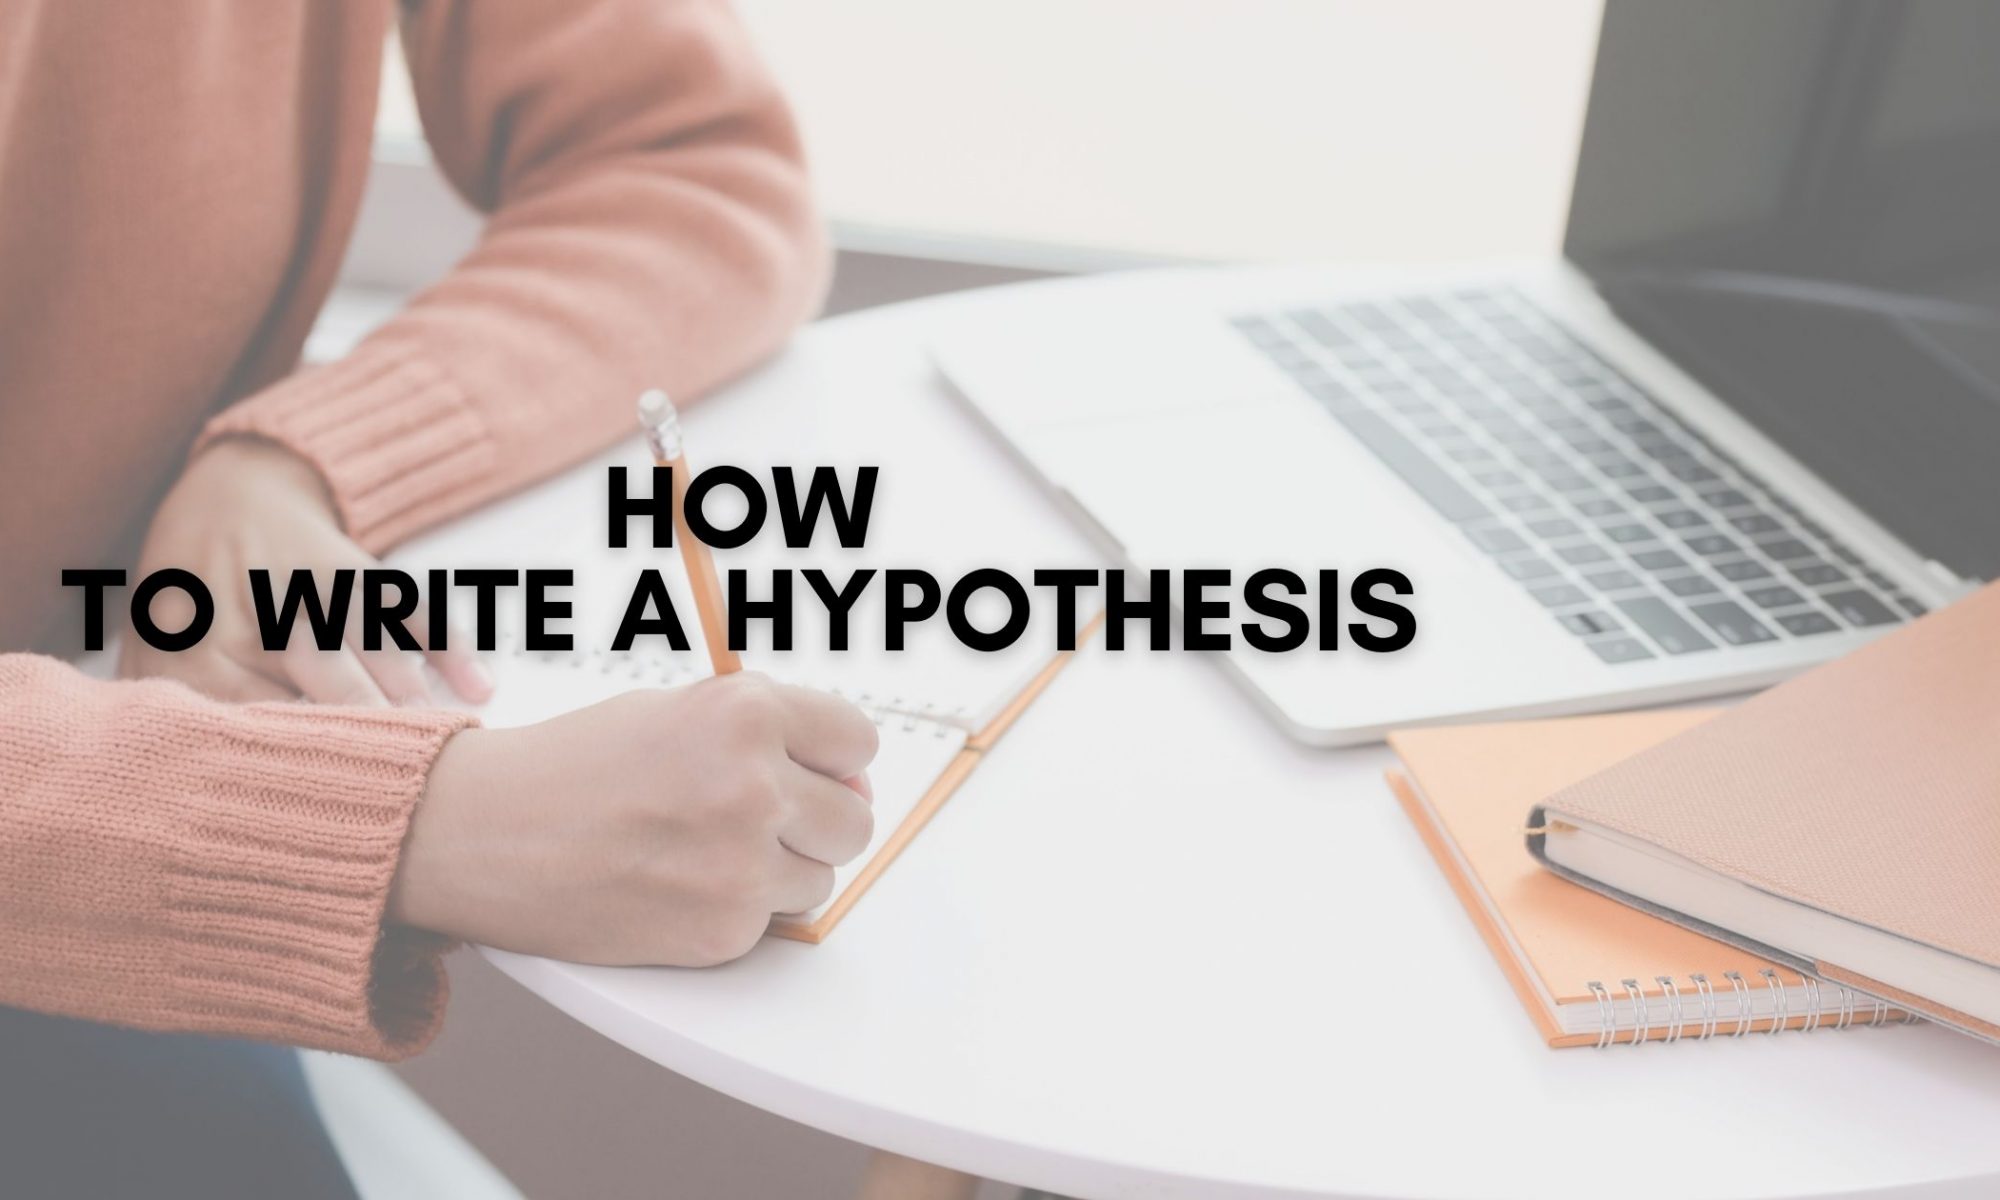 How To Write a Hypothesis